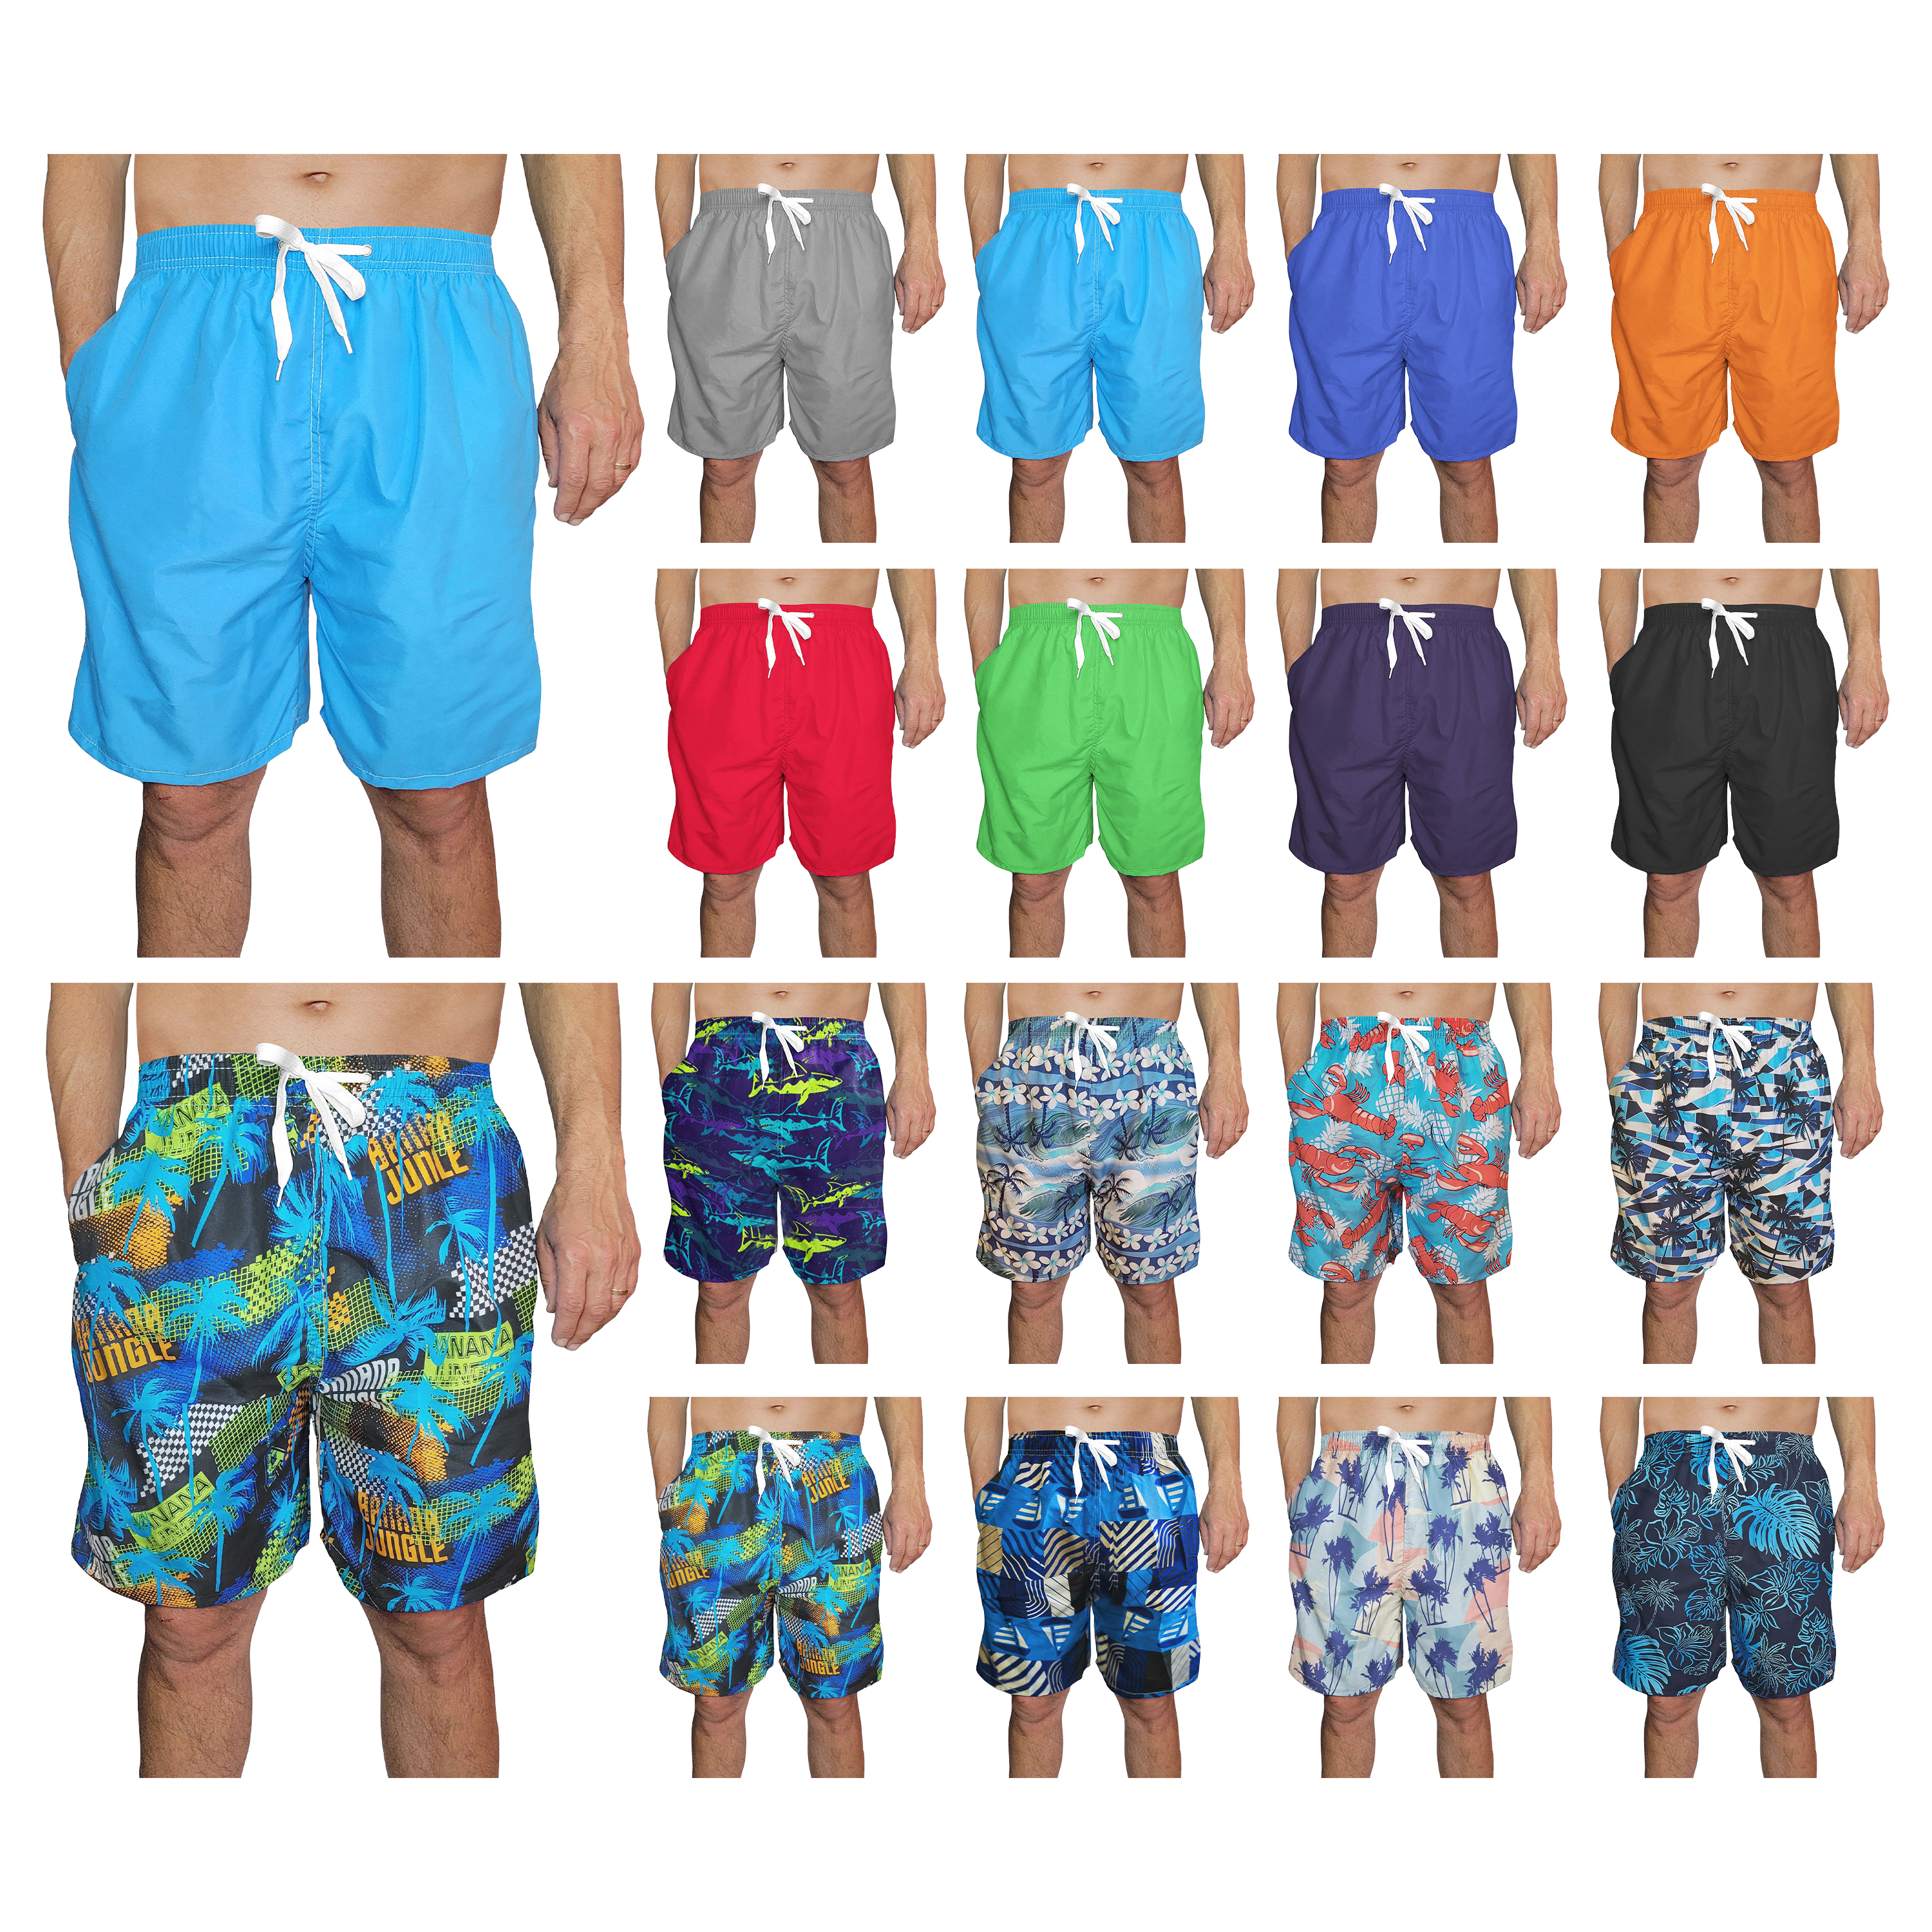 3-Pack: Men's Quick-Dry Solid & Printed Summer Beach Surf Board Swim Trunks Shorts - X-Large, Solid